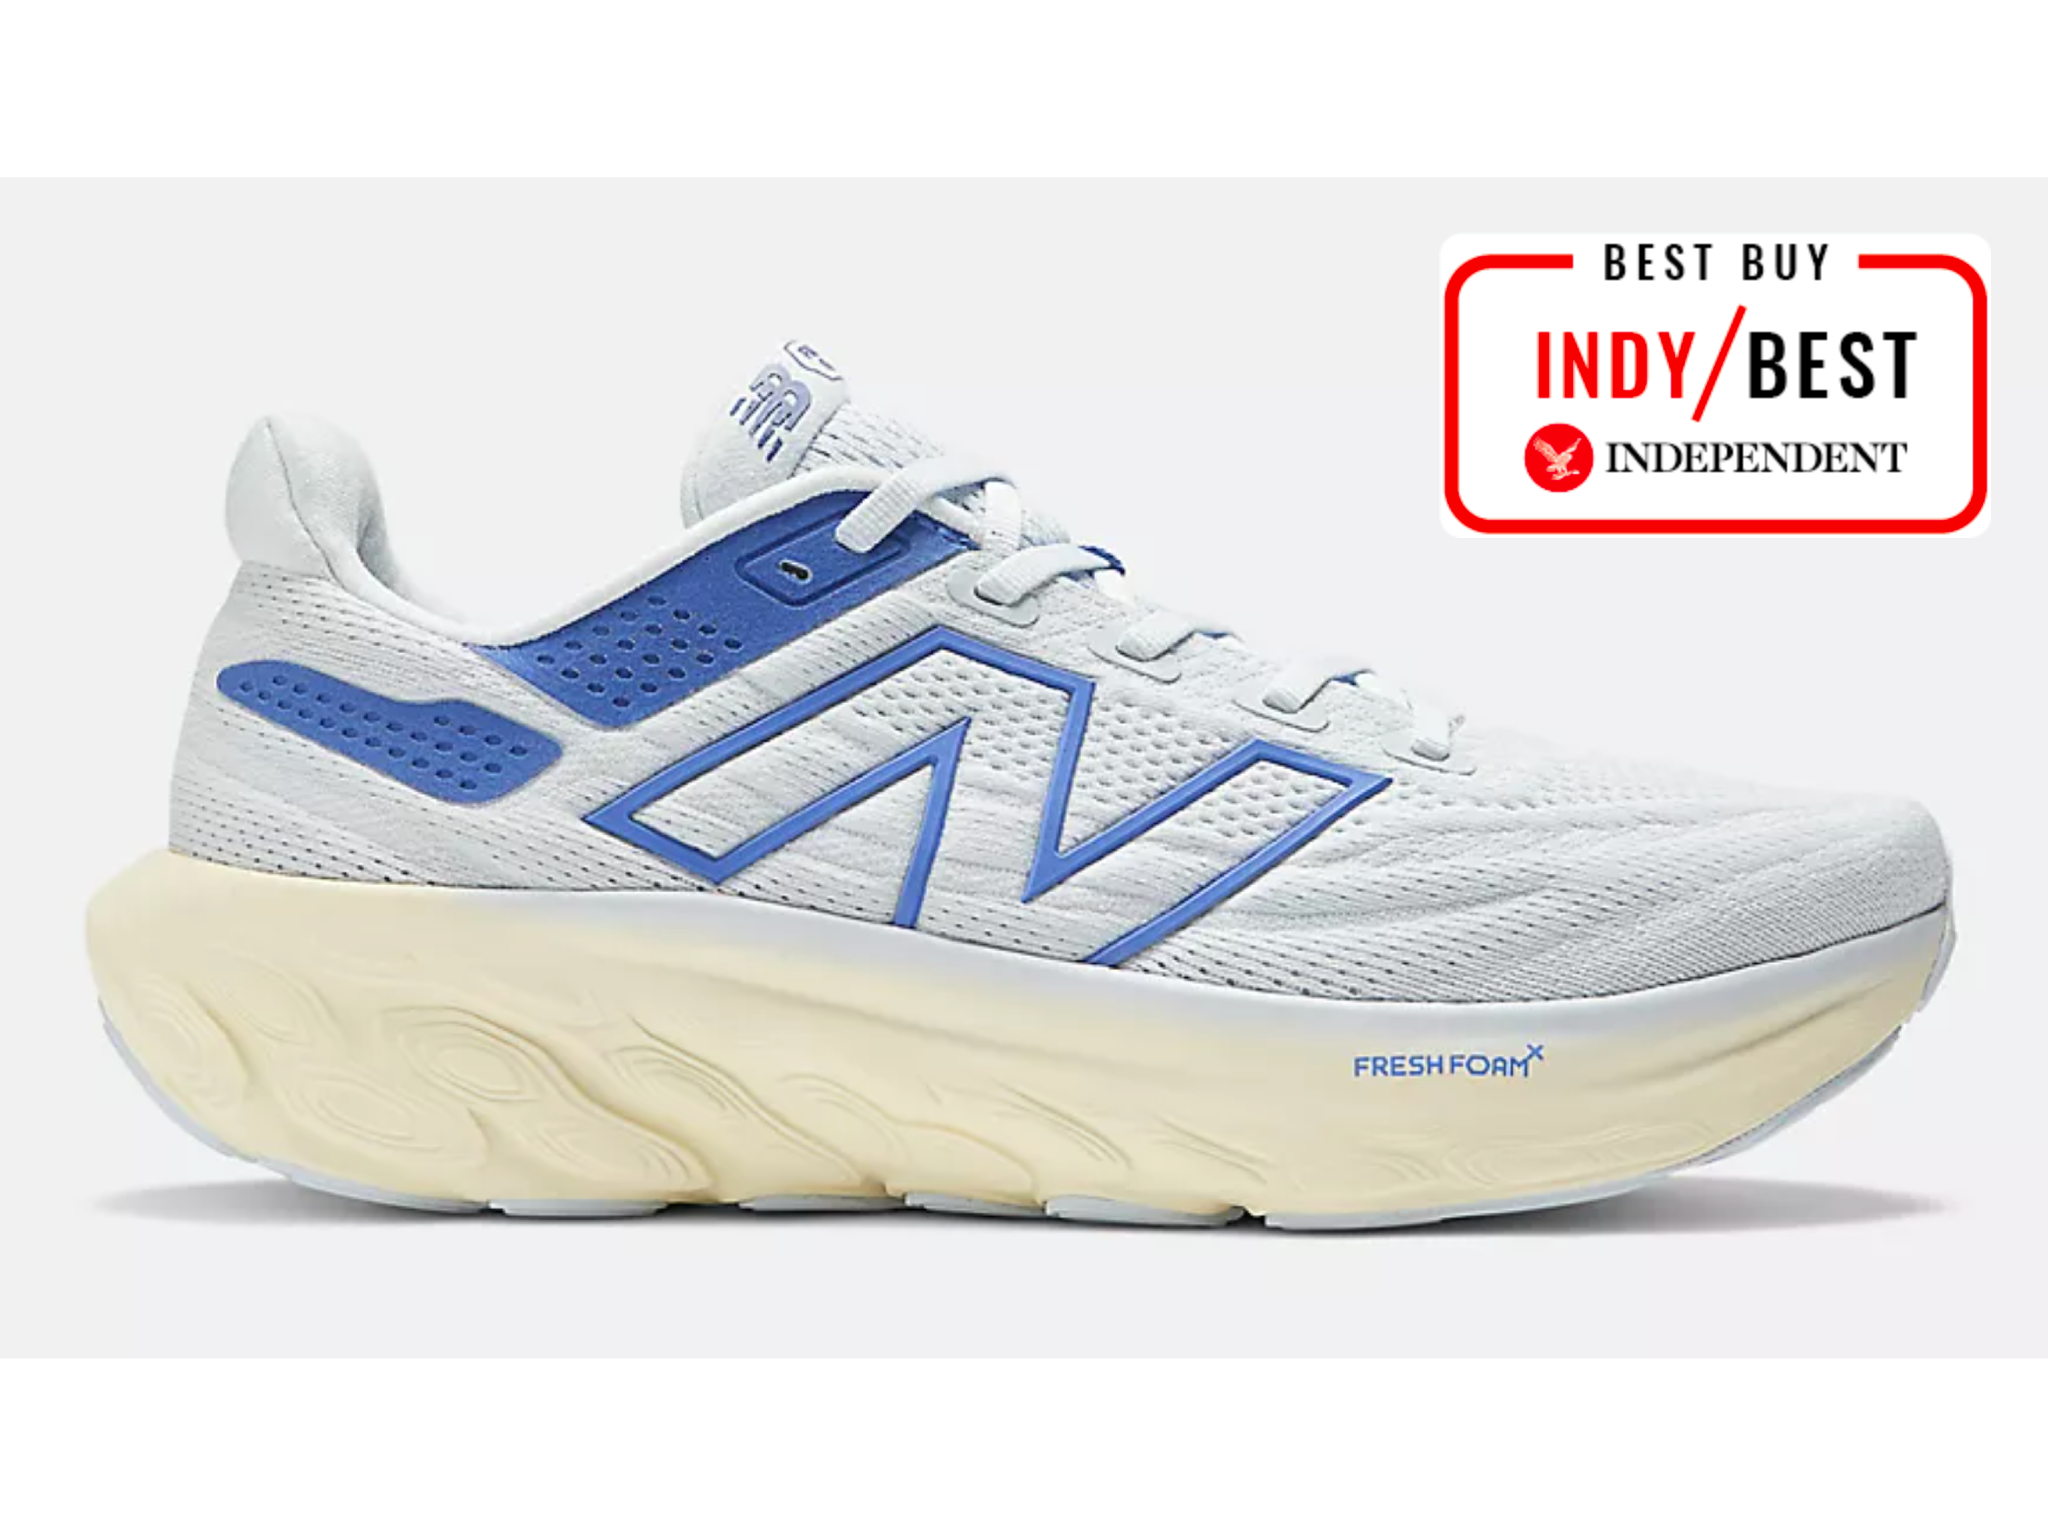 New-balances-running shoes-indybest